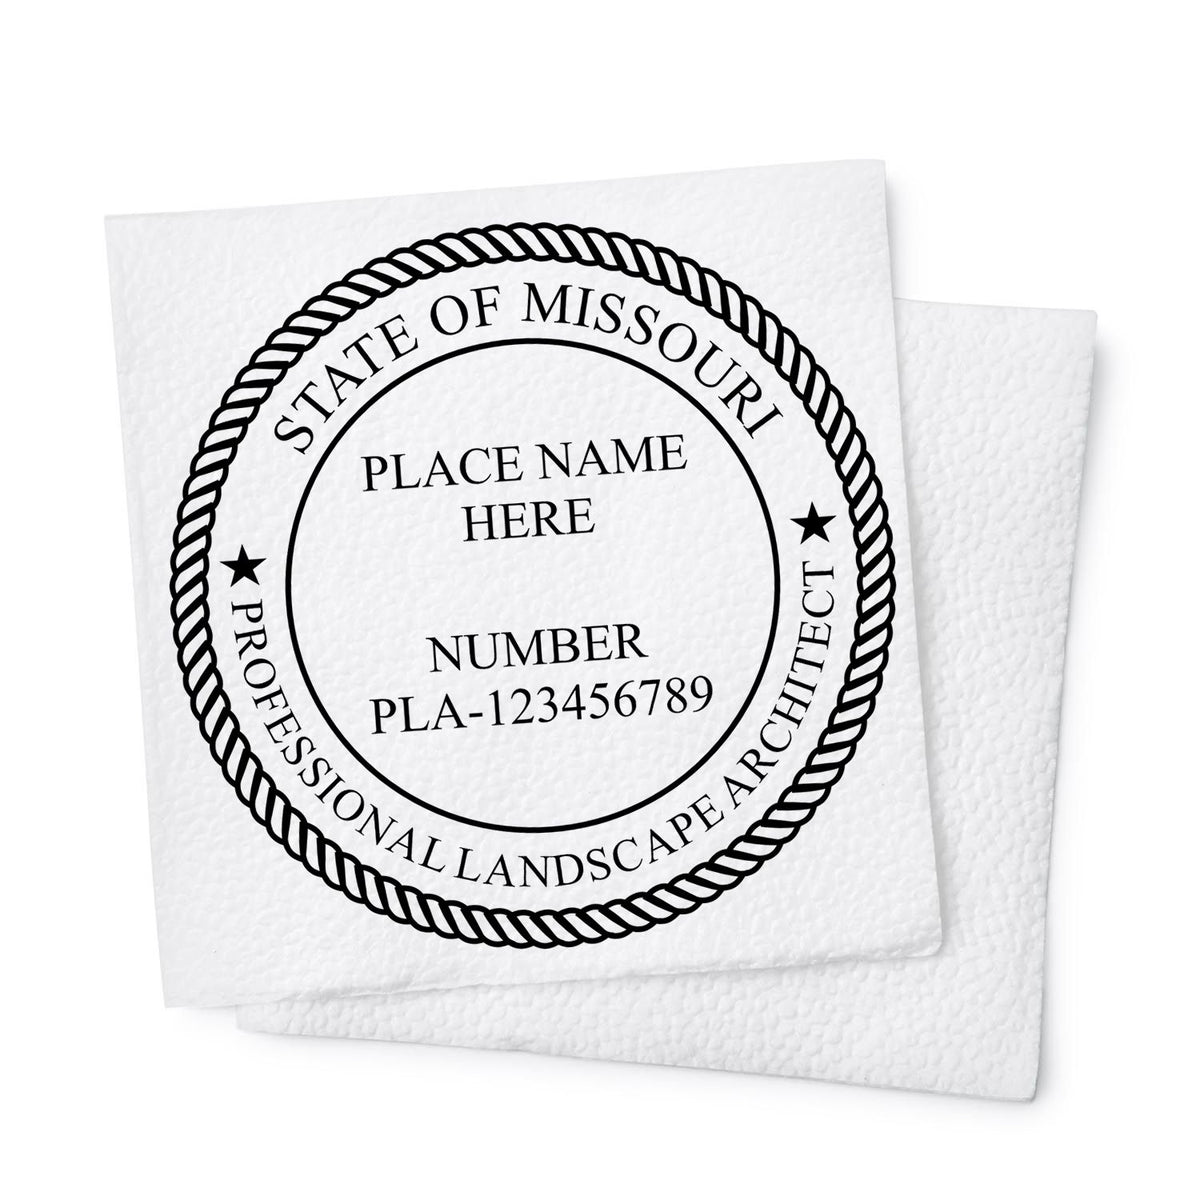 This paper is stamped with a sample imprint of the Slim Pre-Inked Missouri Landscape Architect Seal Stamp, signifying its quality and reliability.